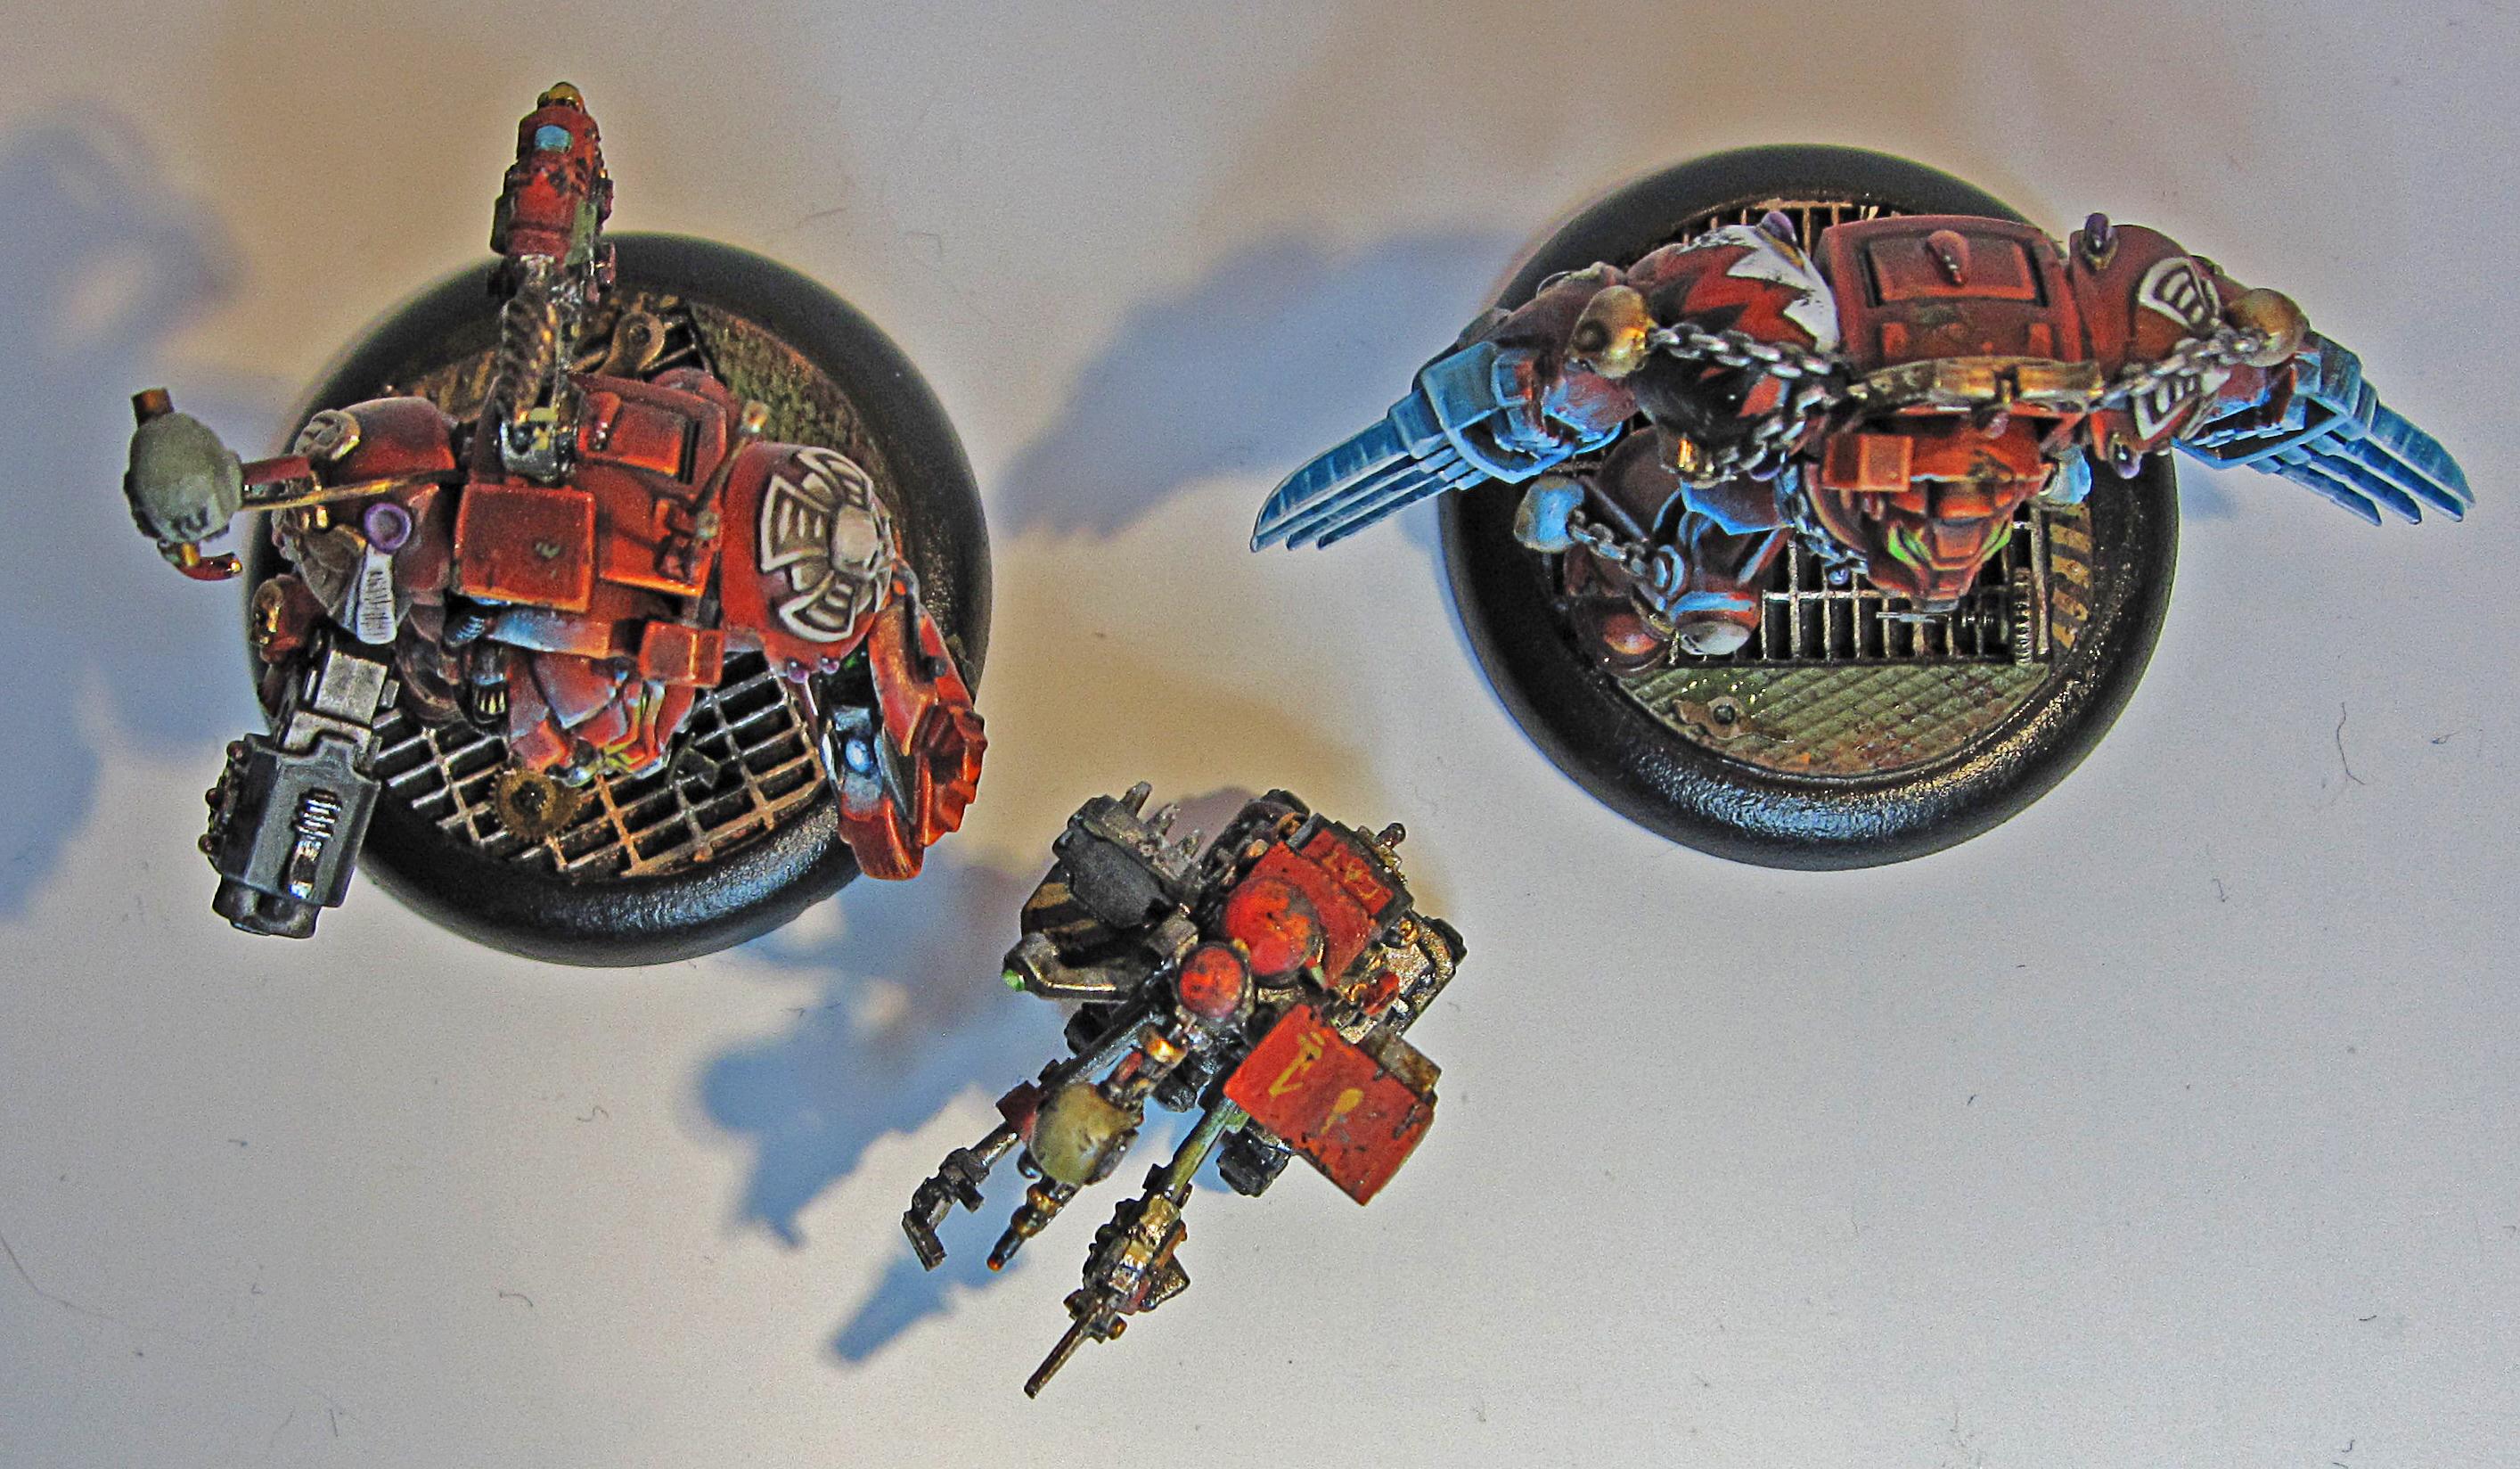 Space Hulk Blood Angel Terminators Claudio and Omni with C.A.T